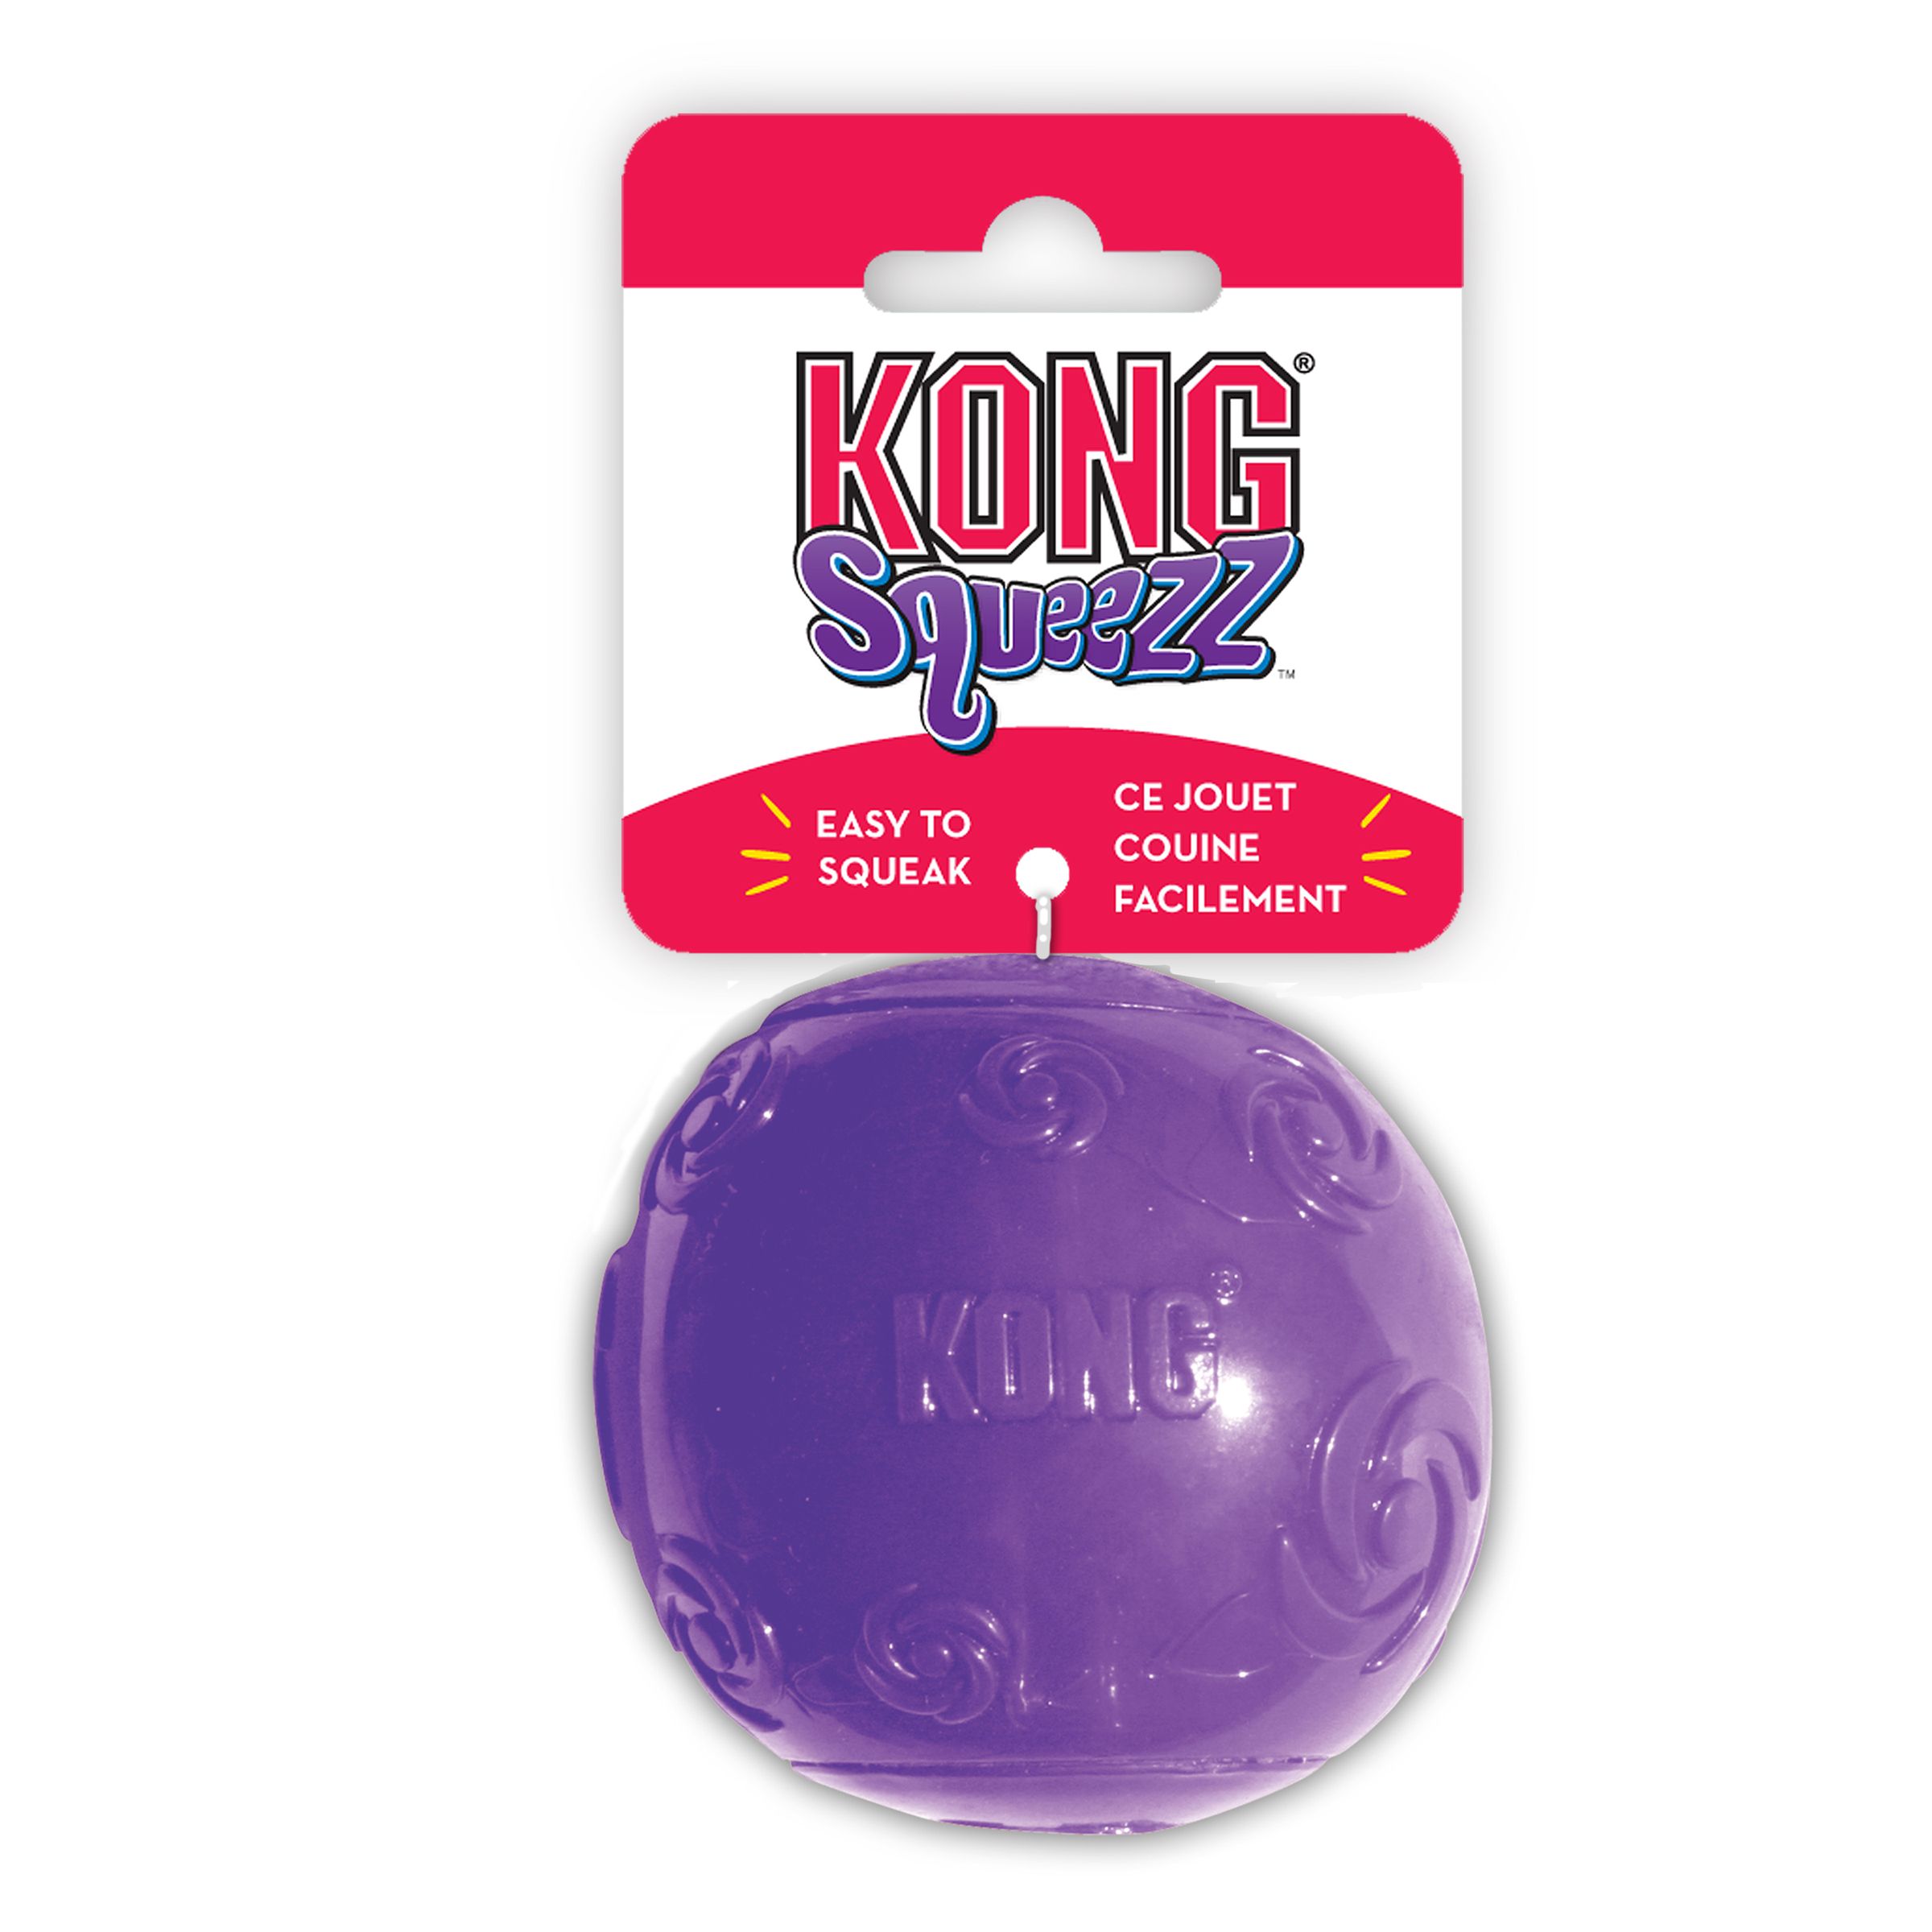 KONG® Squeezz® Ball Dog Toy - Squeaker 